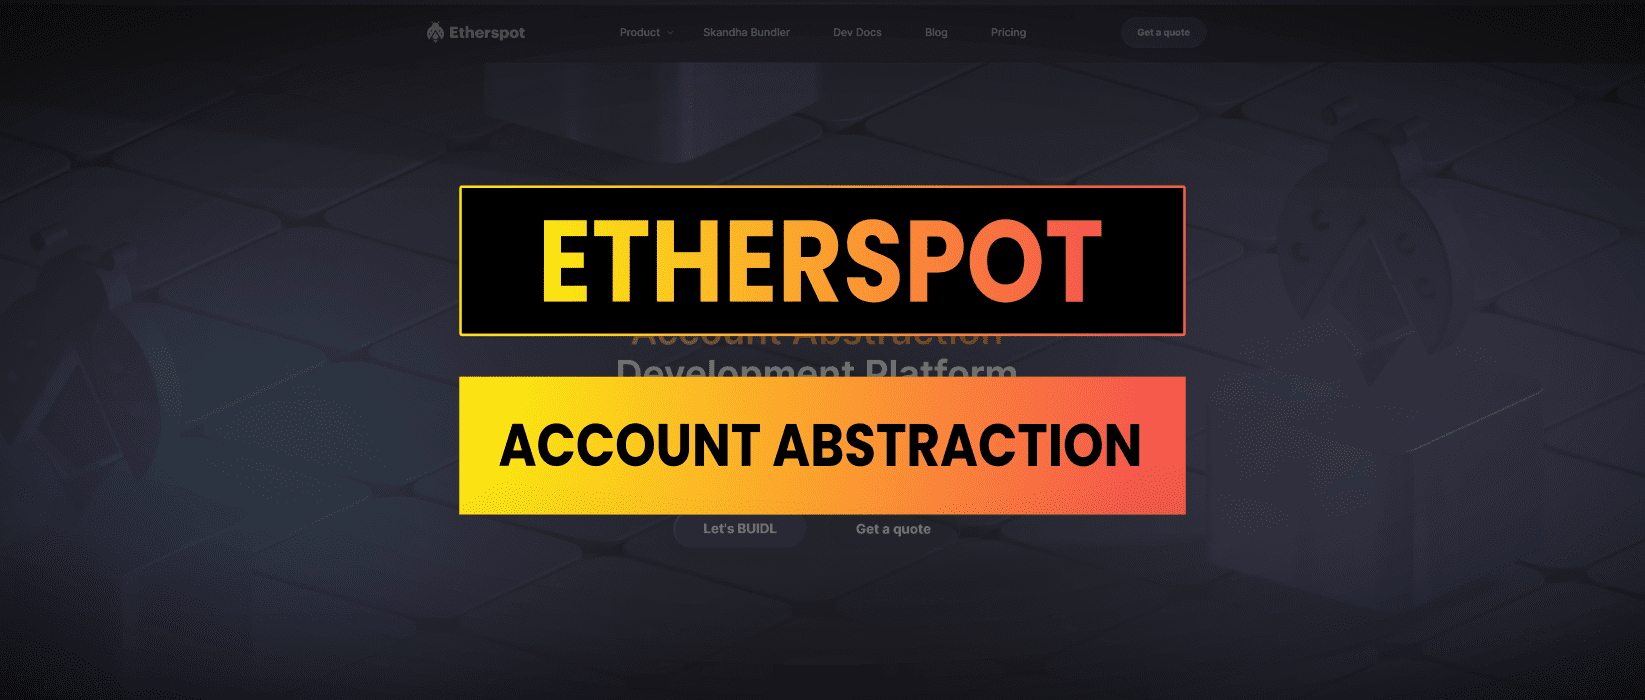 Etherspot Account Abstraction Tutorial